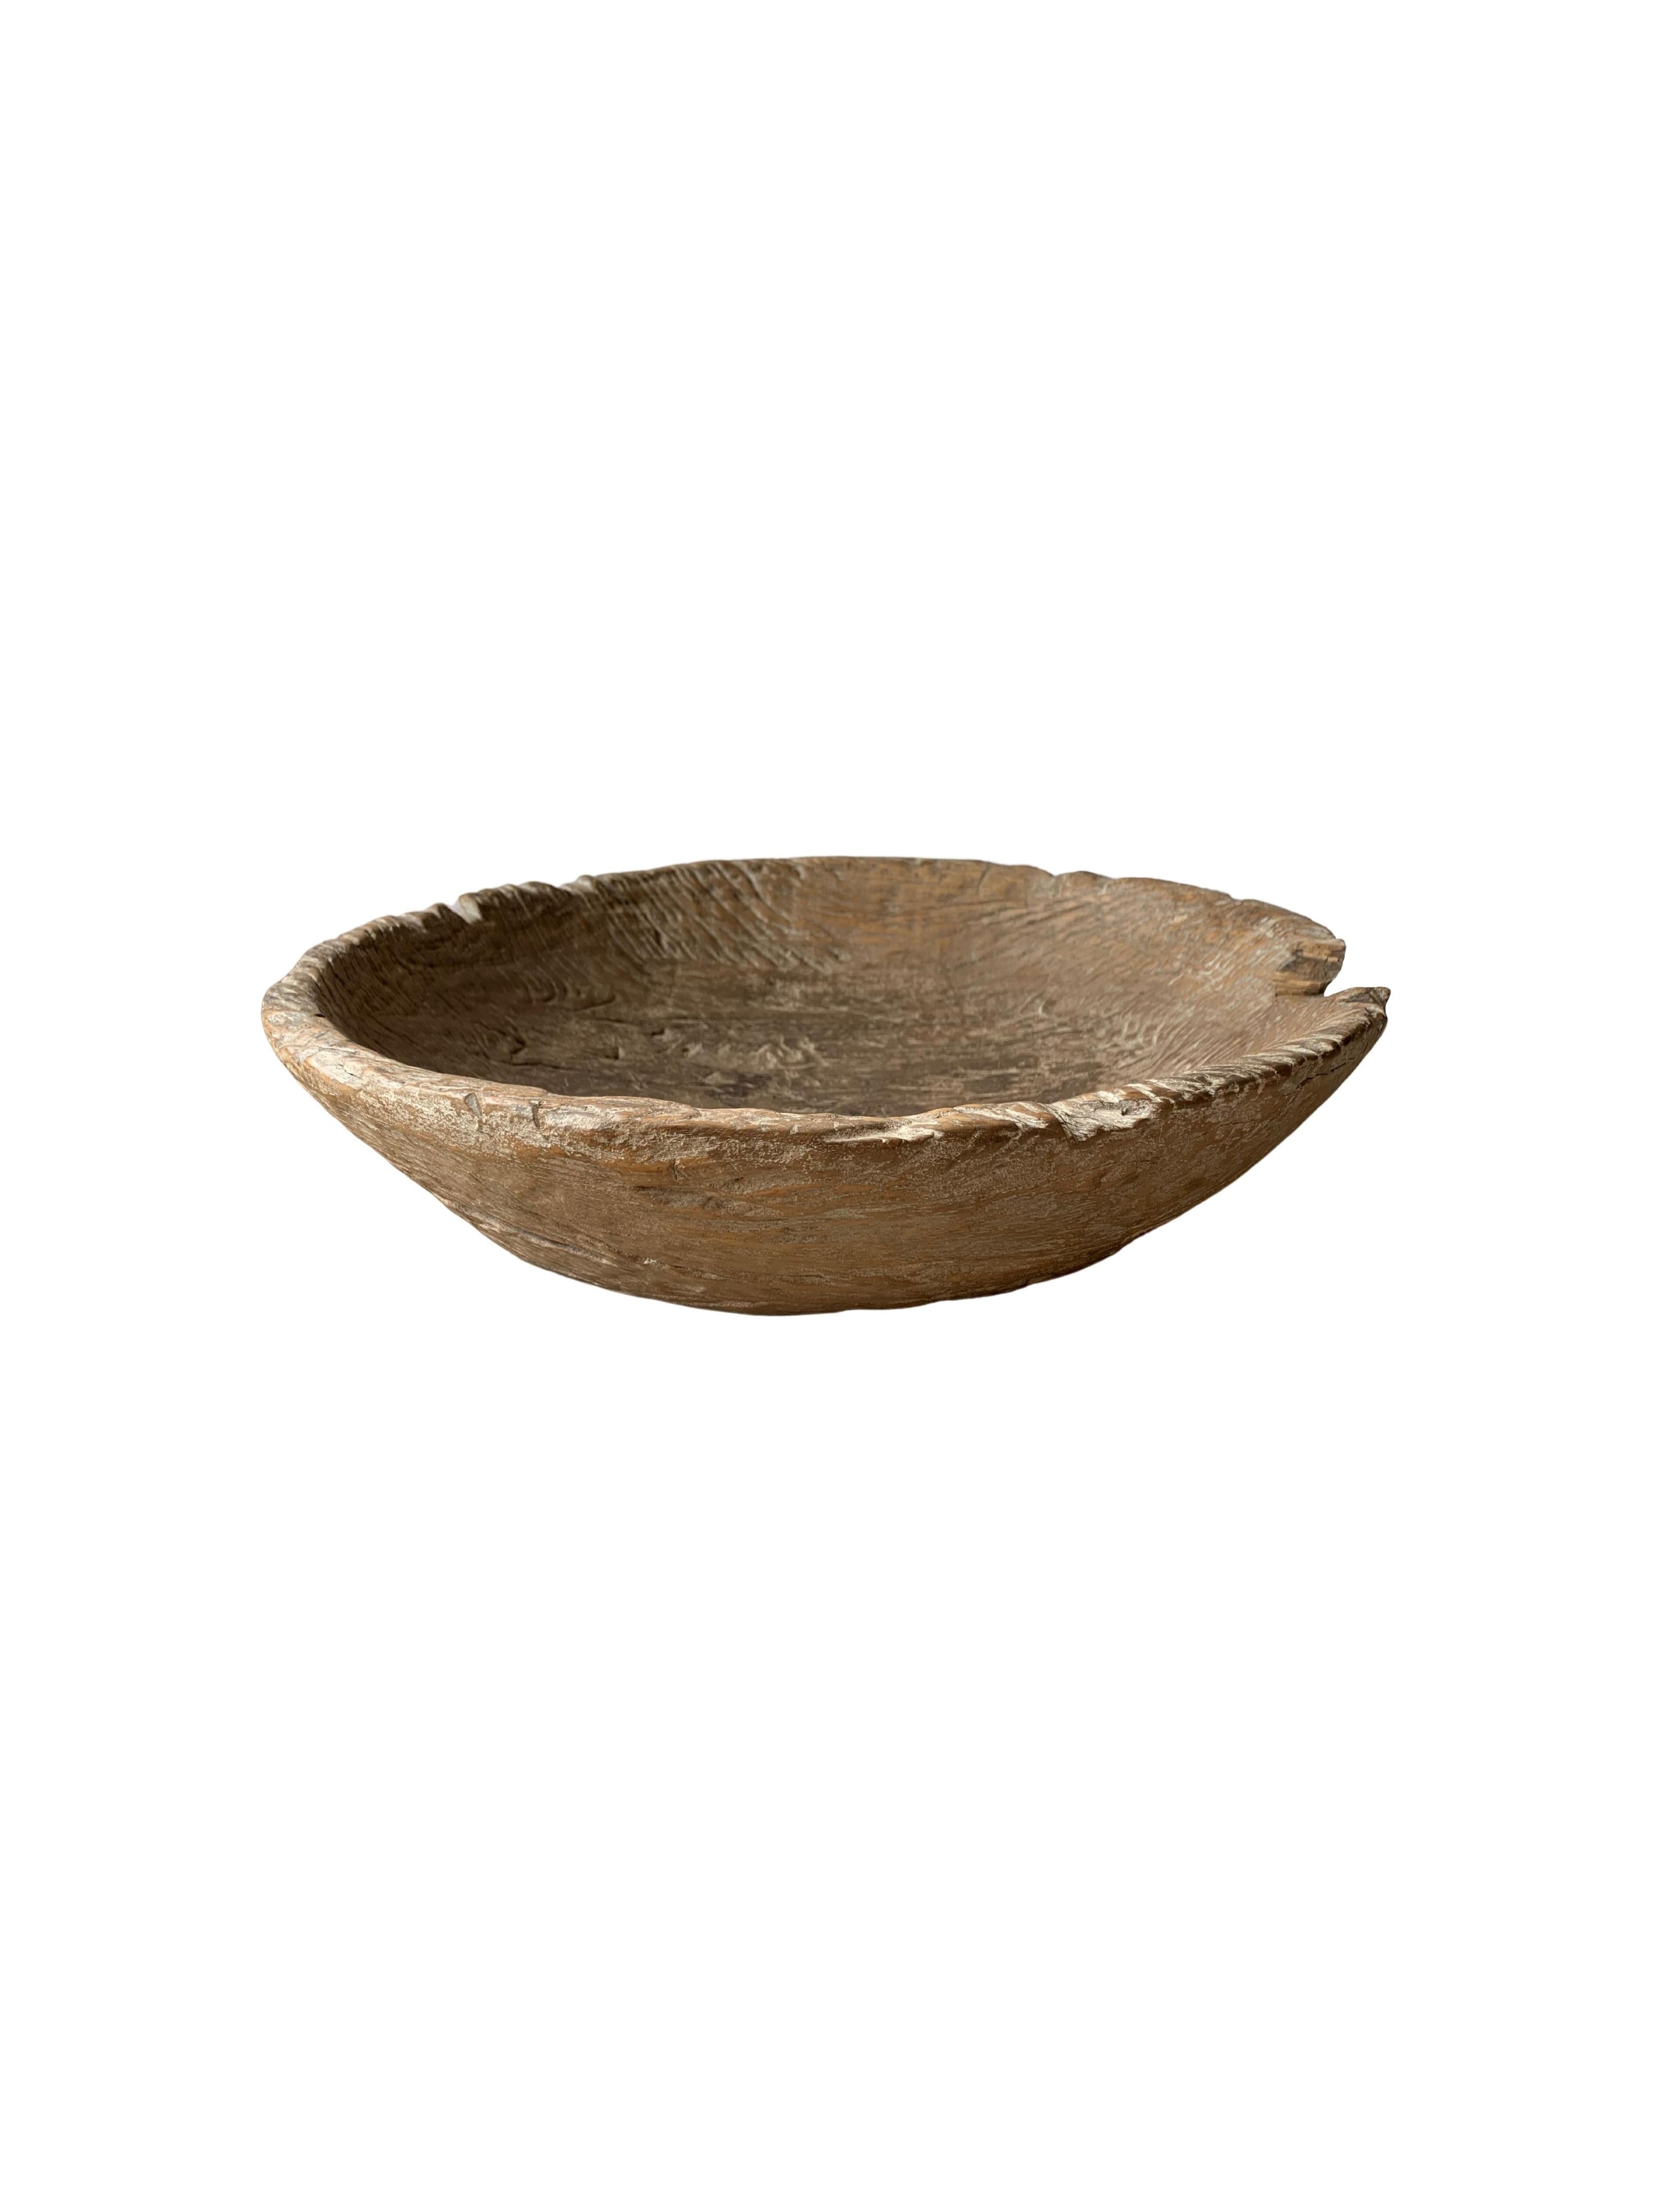 A teak burl wood bowl crafted on the island of Java, Indonesia. The bowl was cut from a much larger slab of burl wood and maintains an organic shape and natural texture. It has aged considerably over the decades contributing to its appeal. 

